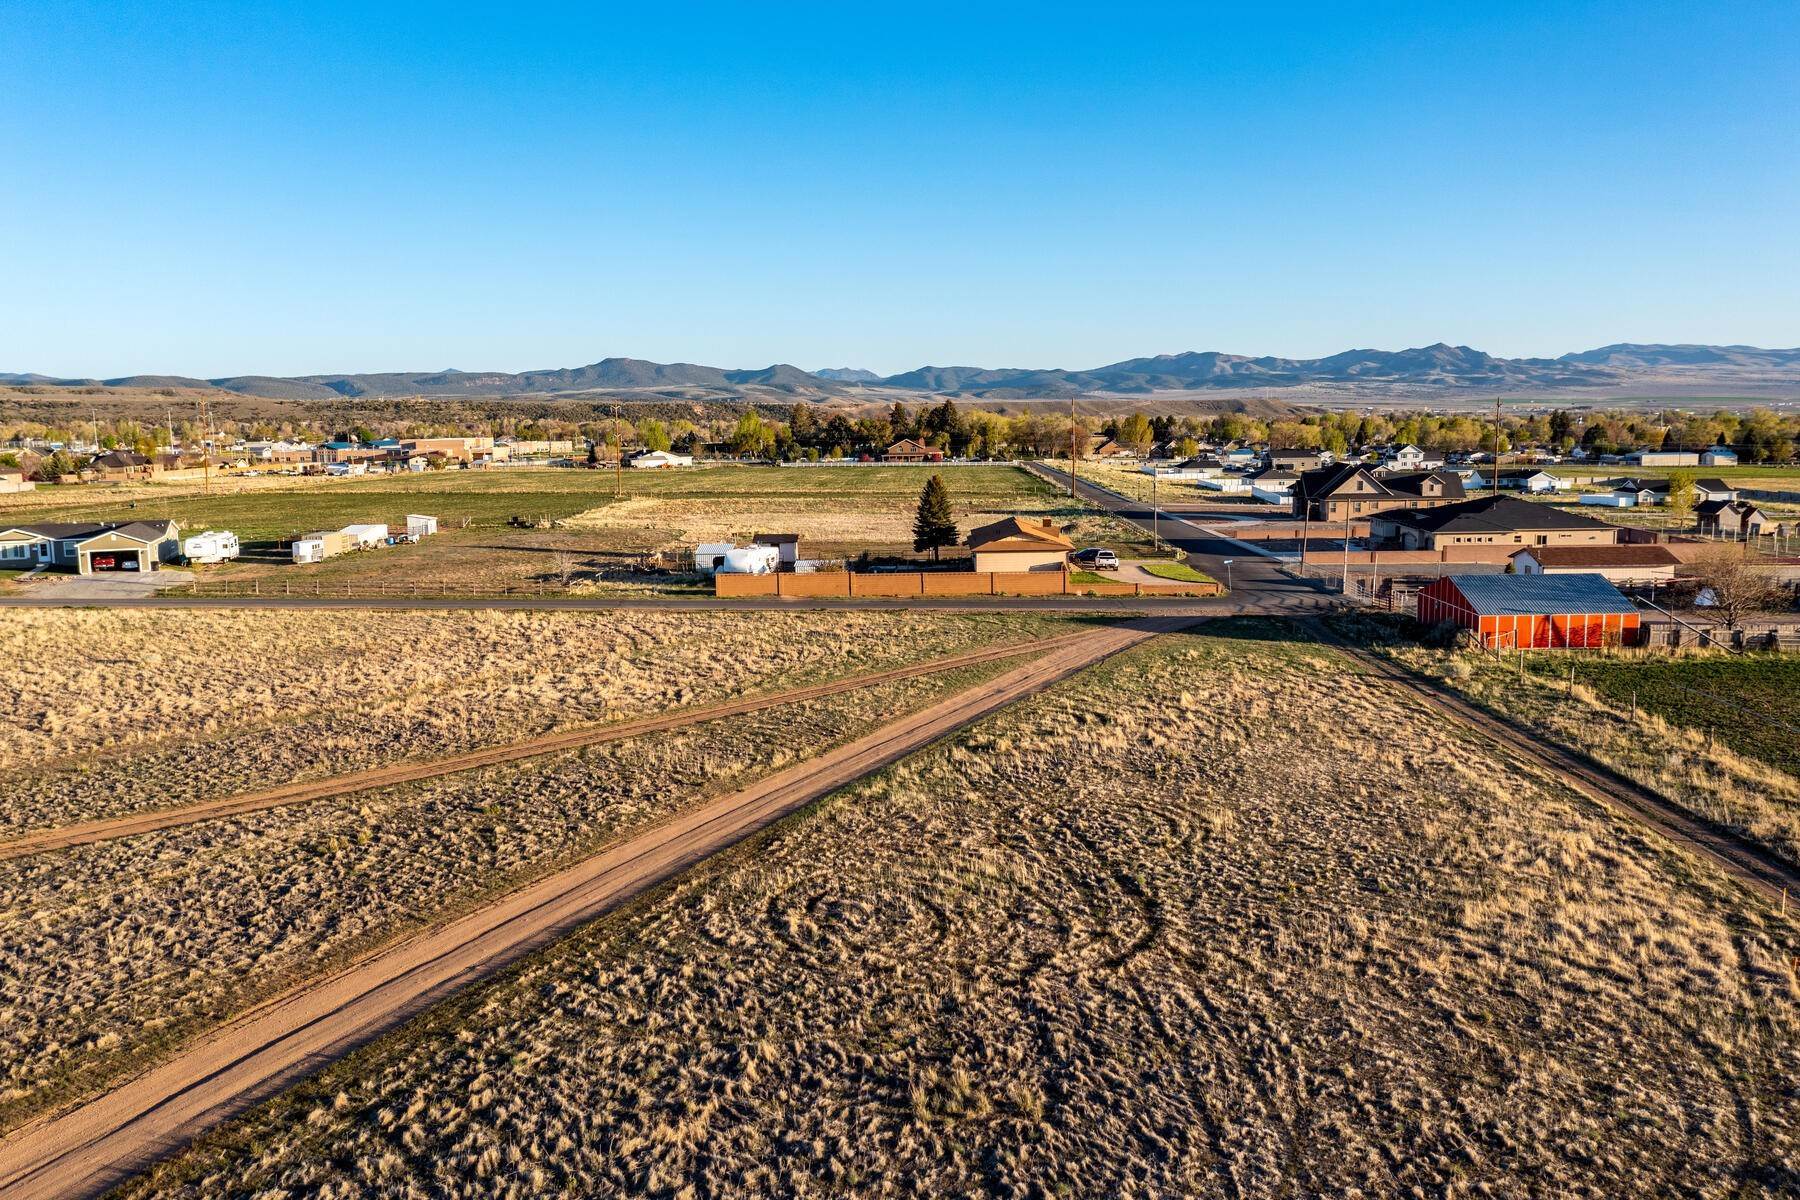 Land for Sale at Friendly Hometown Wholesome Living 500 East 885 North, Lot 1 Beaver, Utah 84713 United States